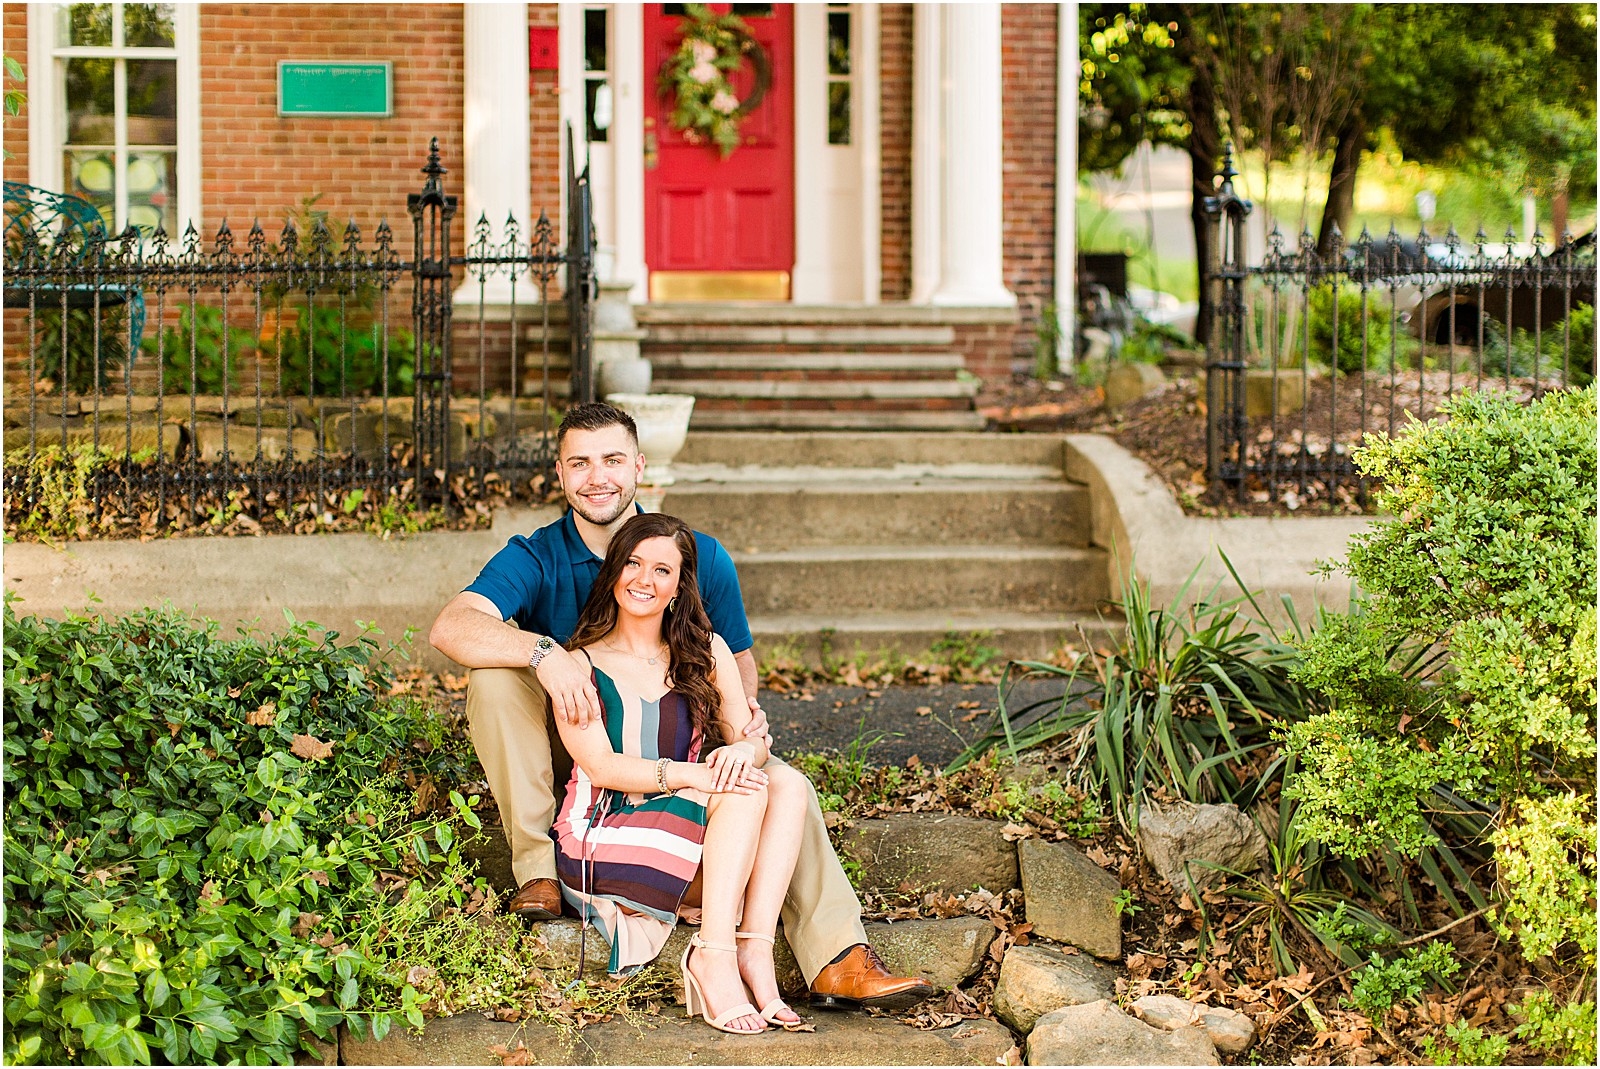 Downtown Newburgh Engagement Session | Matt and Blaire | Bret and Brandie Photography011.jpg